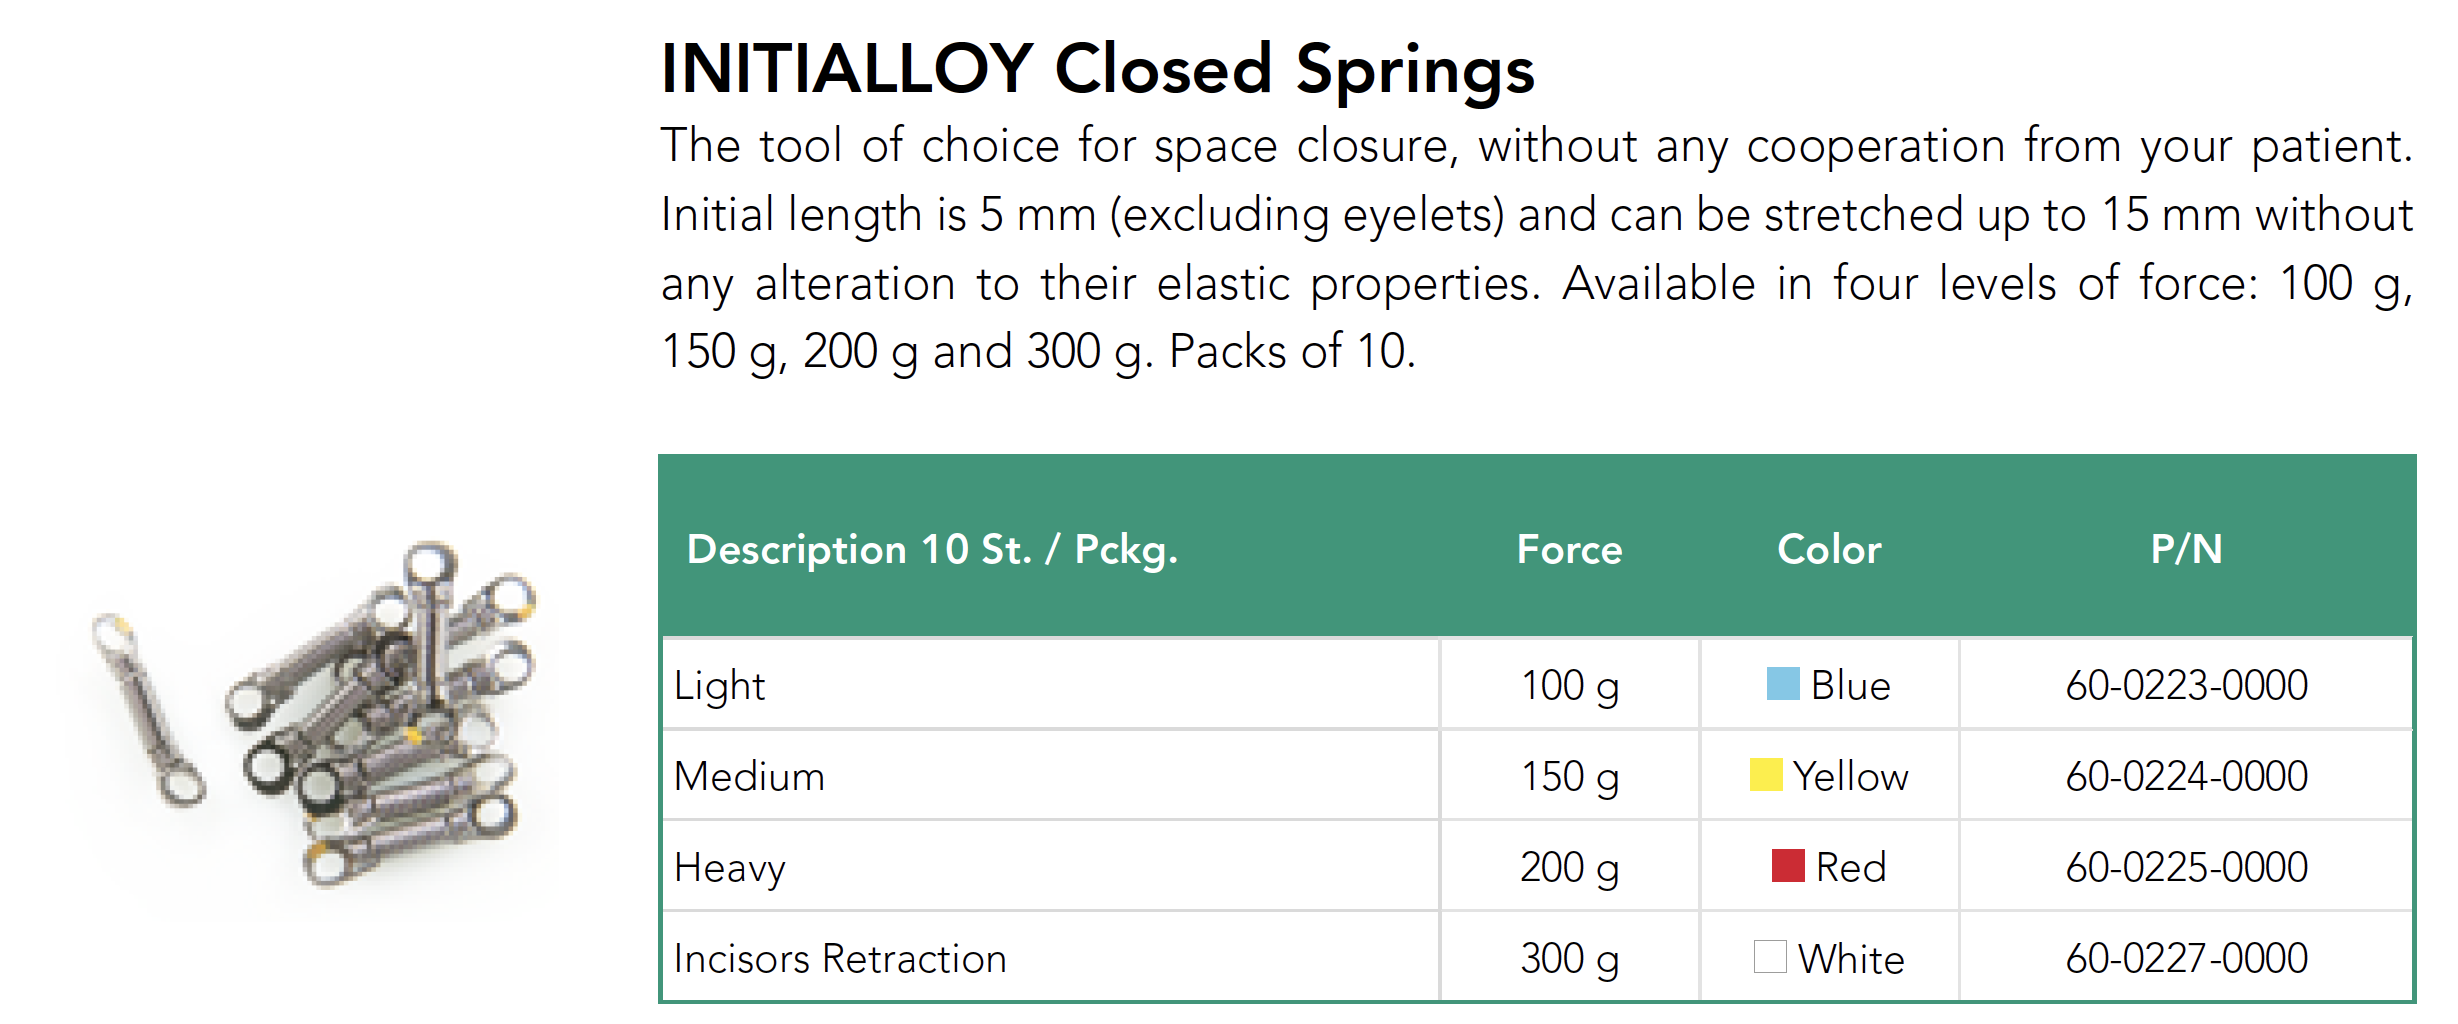 Initialloy Closed Springs